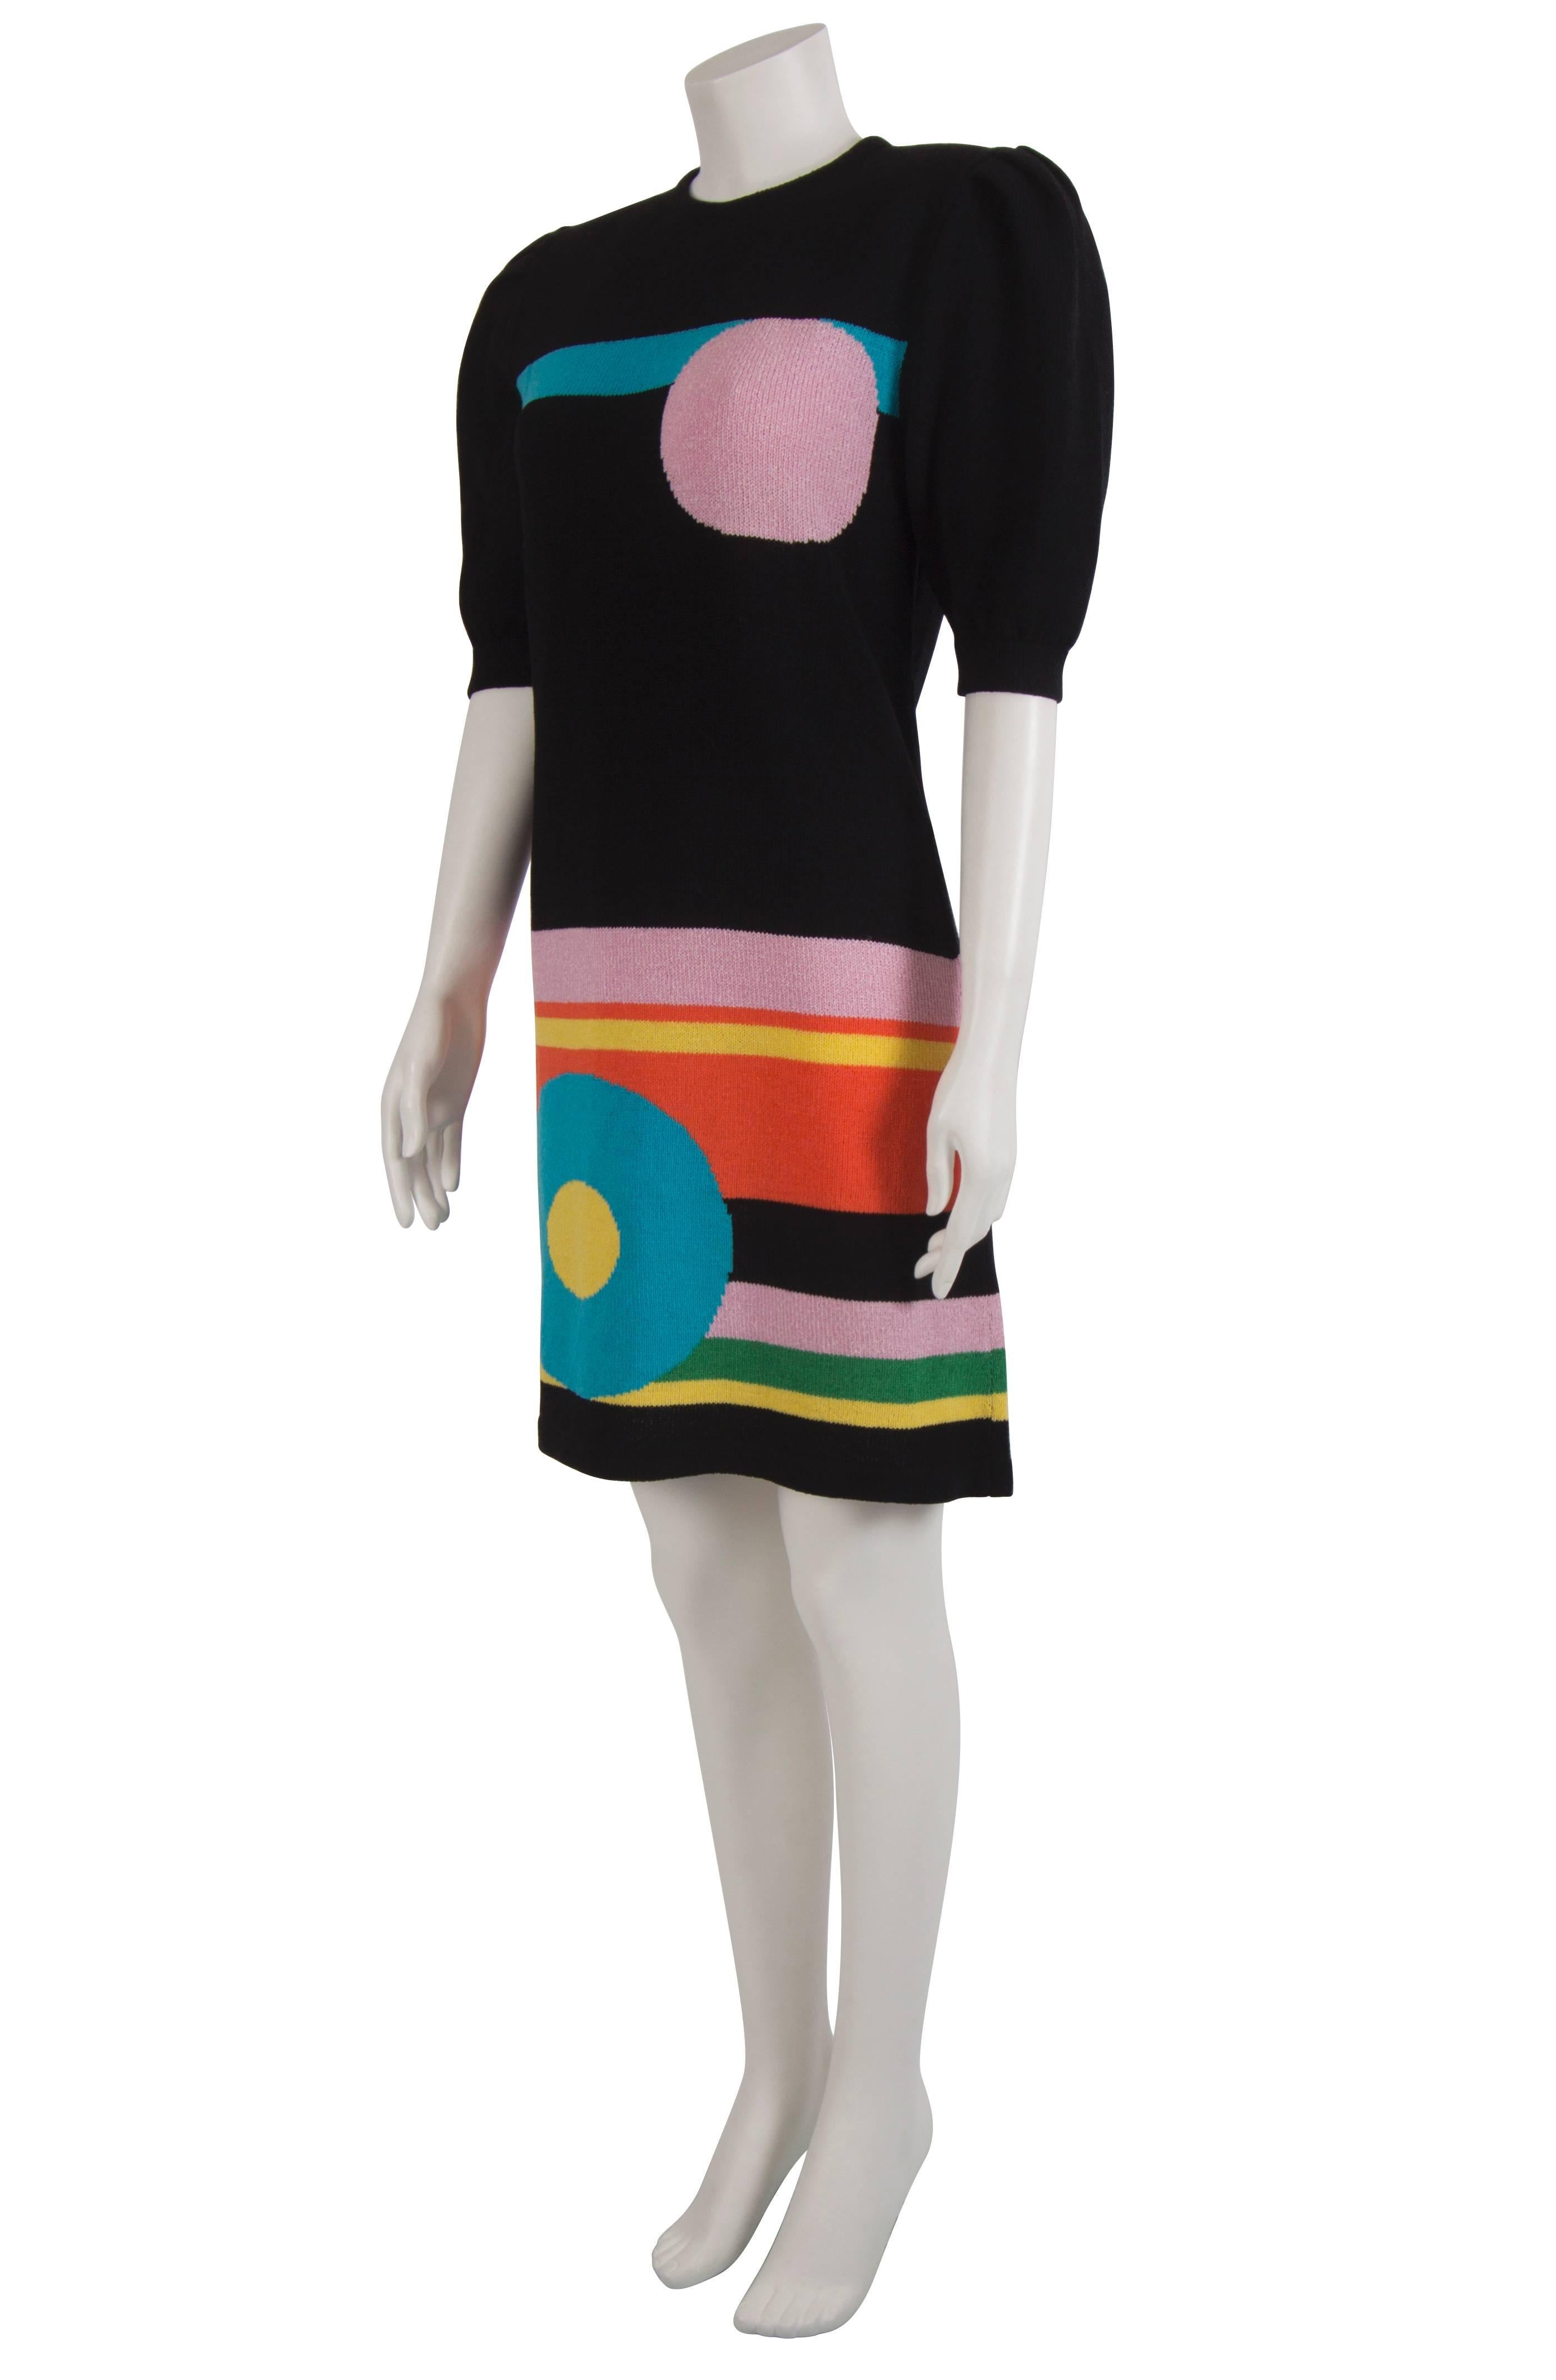 Bold and bright 1980's geometric print wool knitted knee length dress with puffed sleeves. The dress is unlined and fastens with a zip at the centre back. Although it has no labels present, the pattern is from a 1966 Pierre Cardin dress